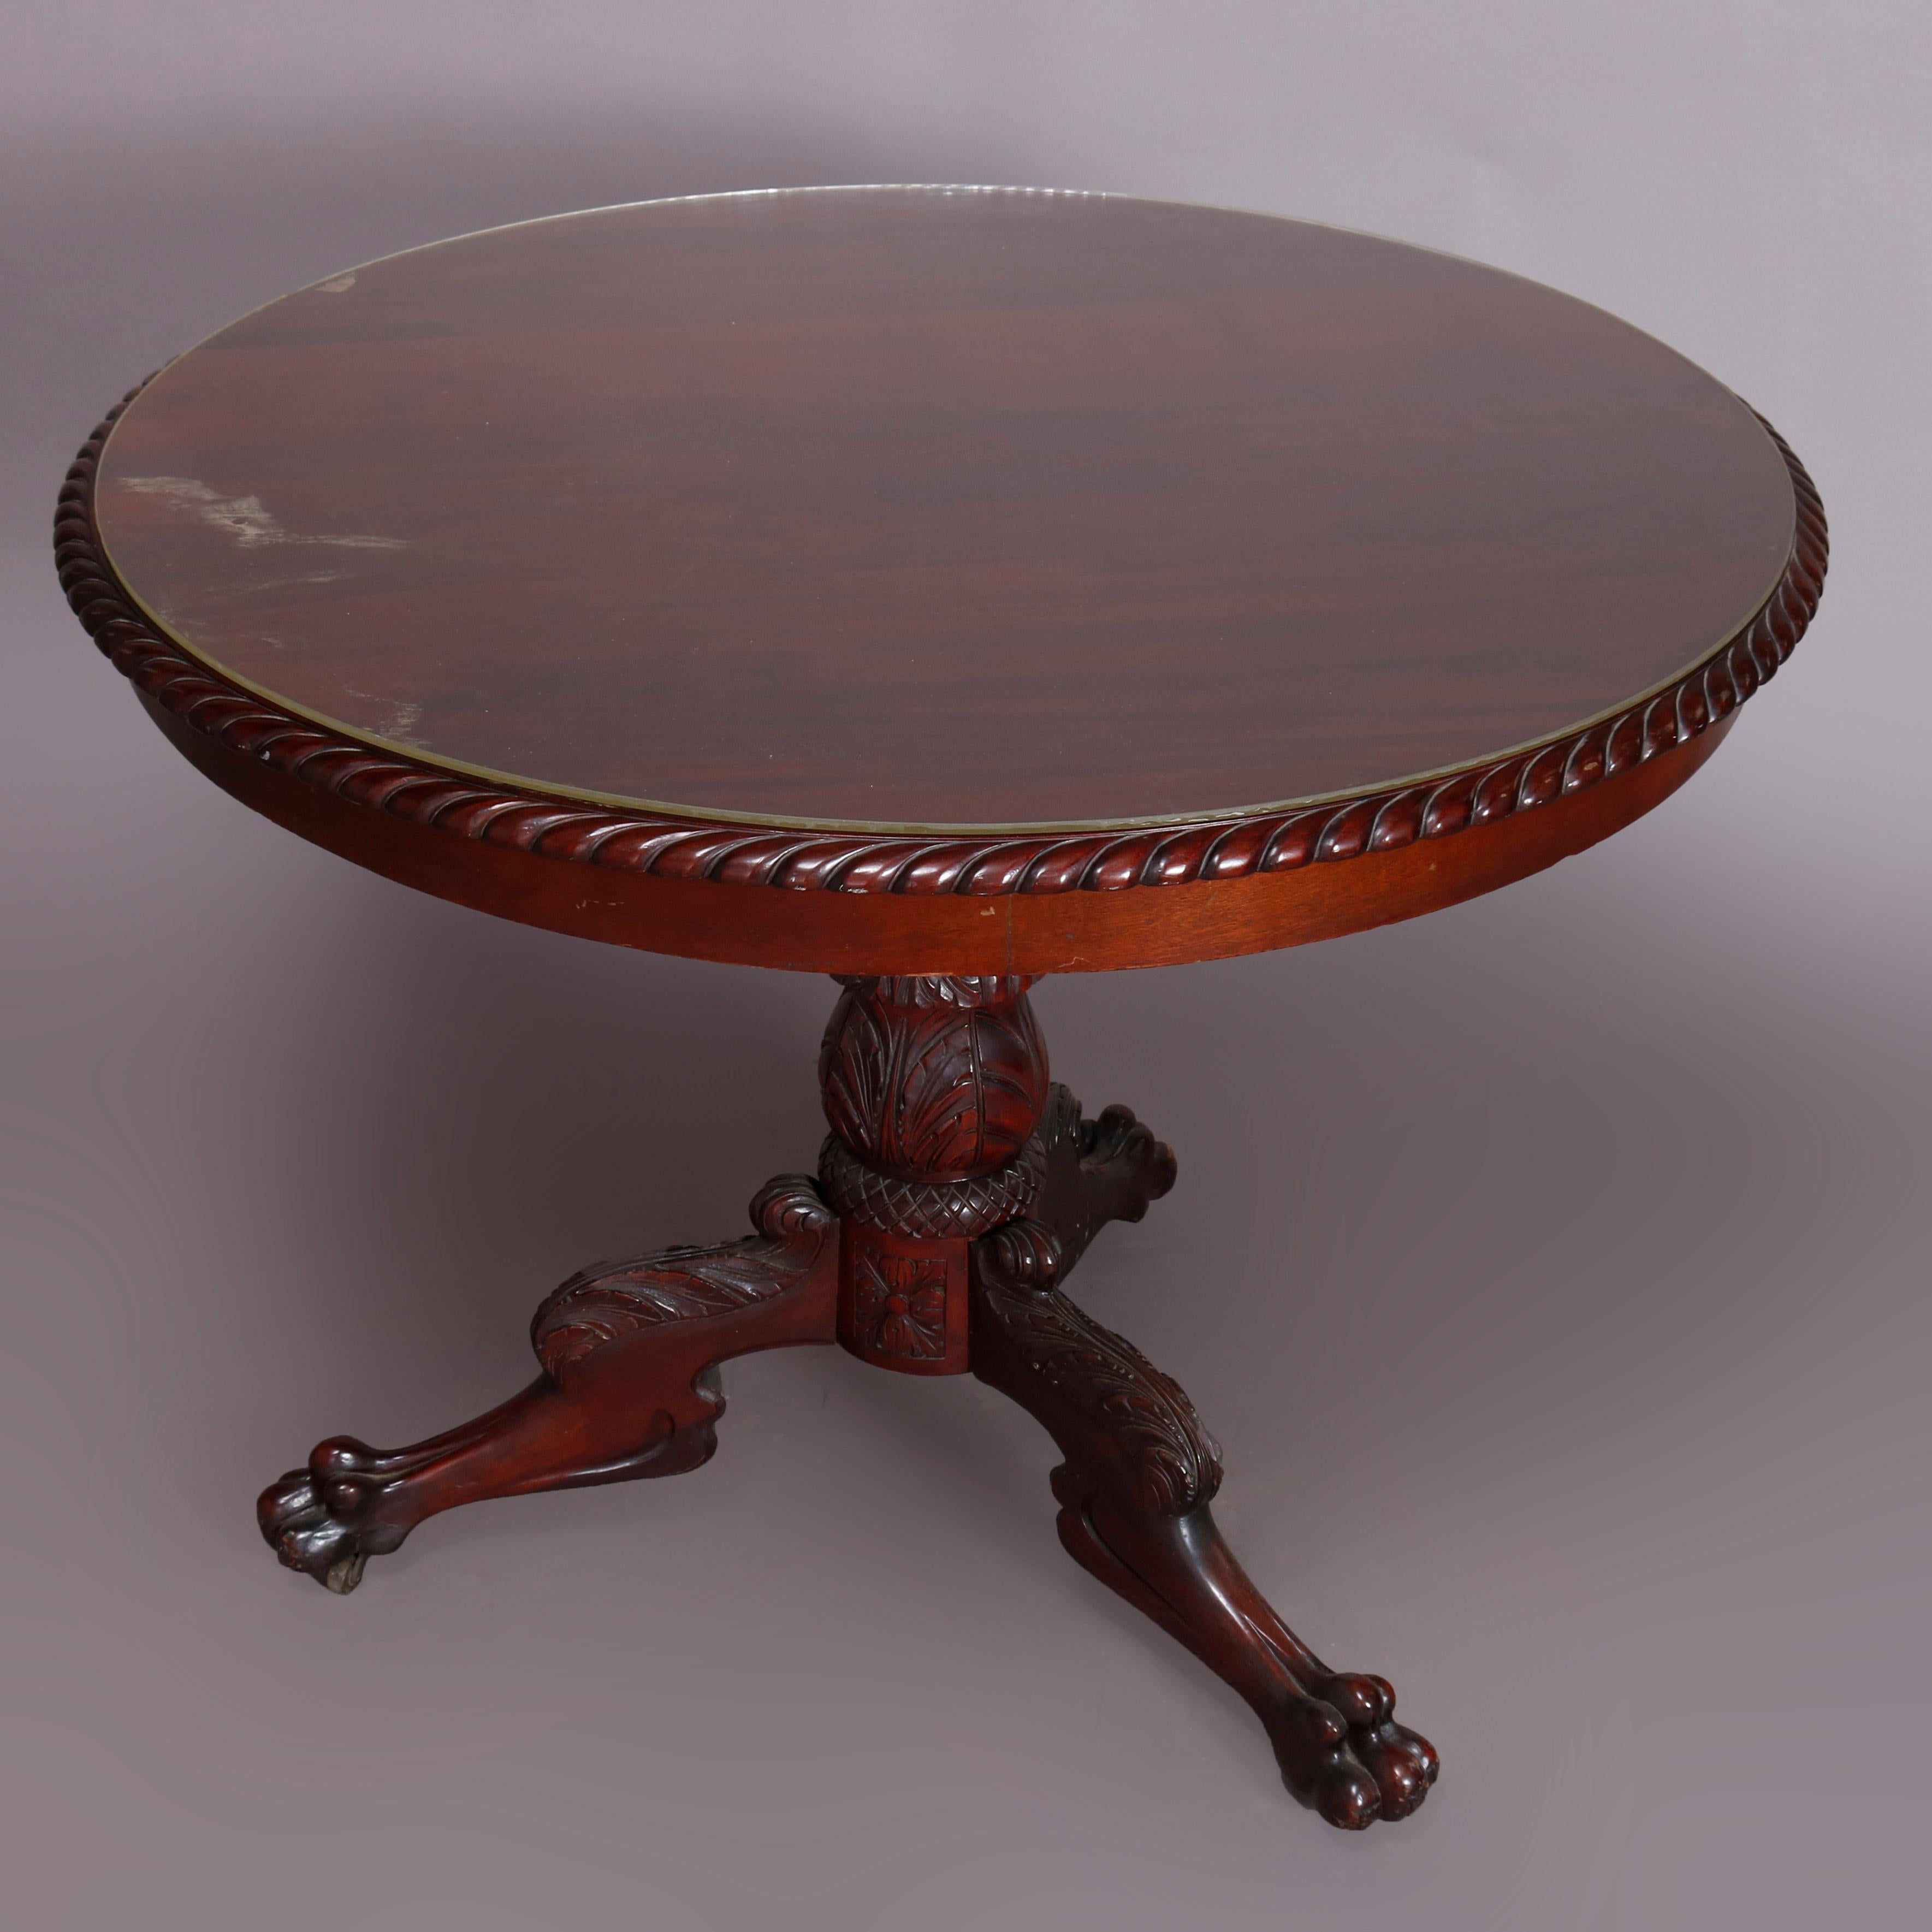 An antique neoclassical style center table offers mahogany construction with circular top having carved rope twist bordering and surmounts a foliate acanthus carved column raised on three legs having scrolled acanthus knees and terminating in paw